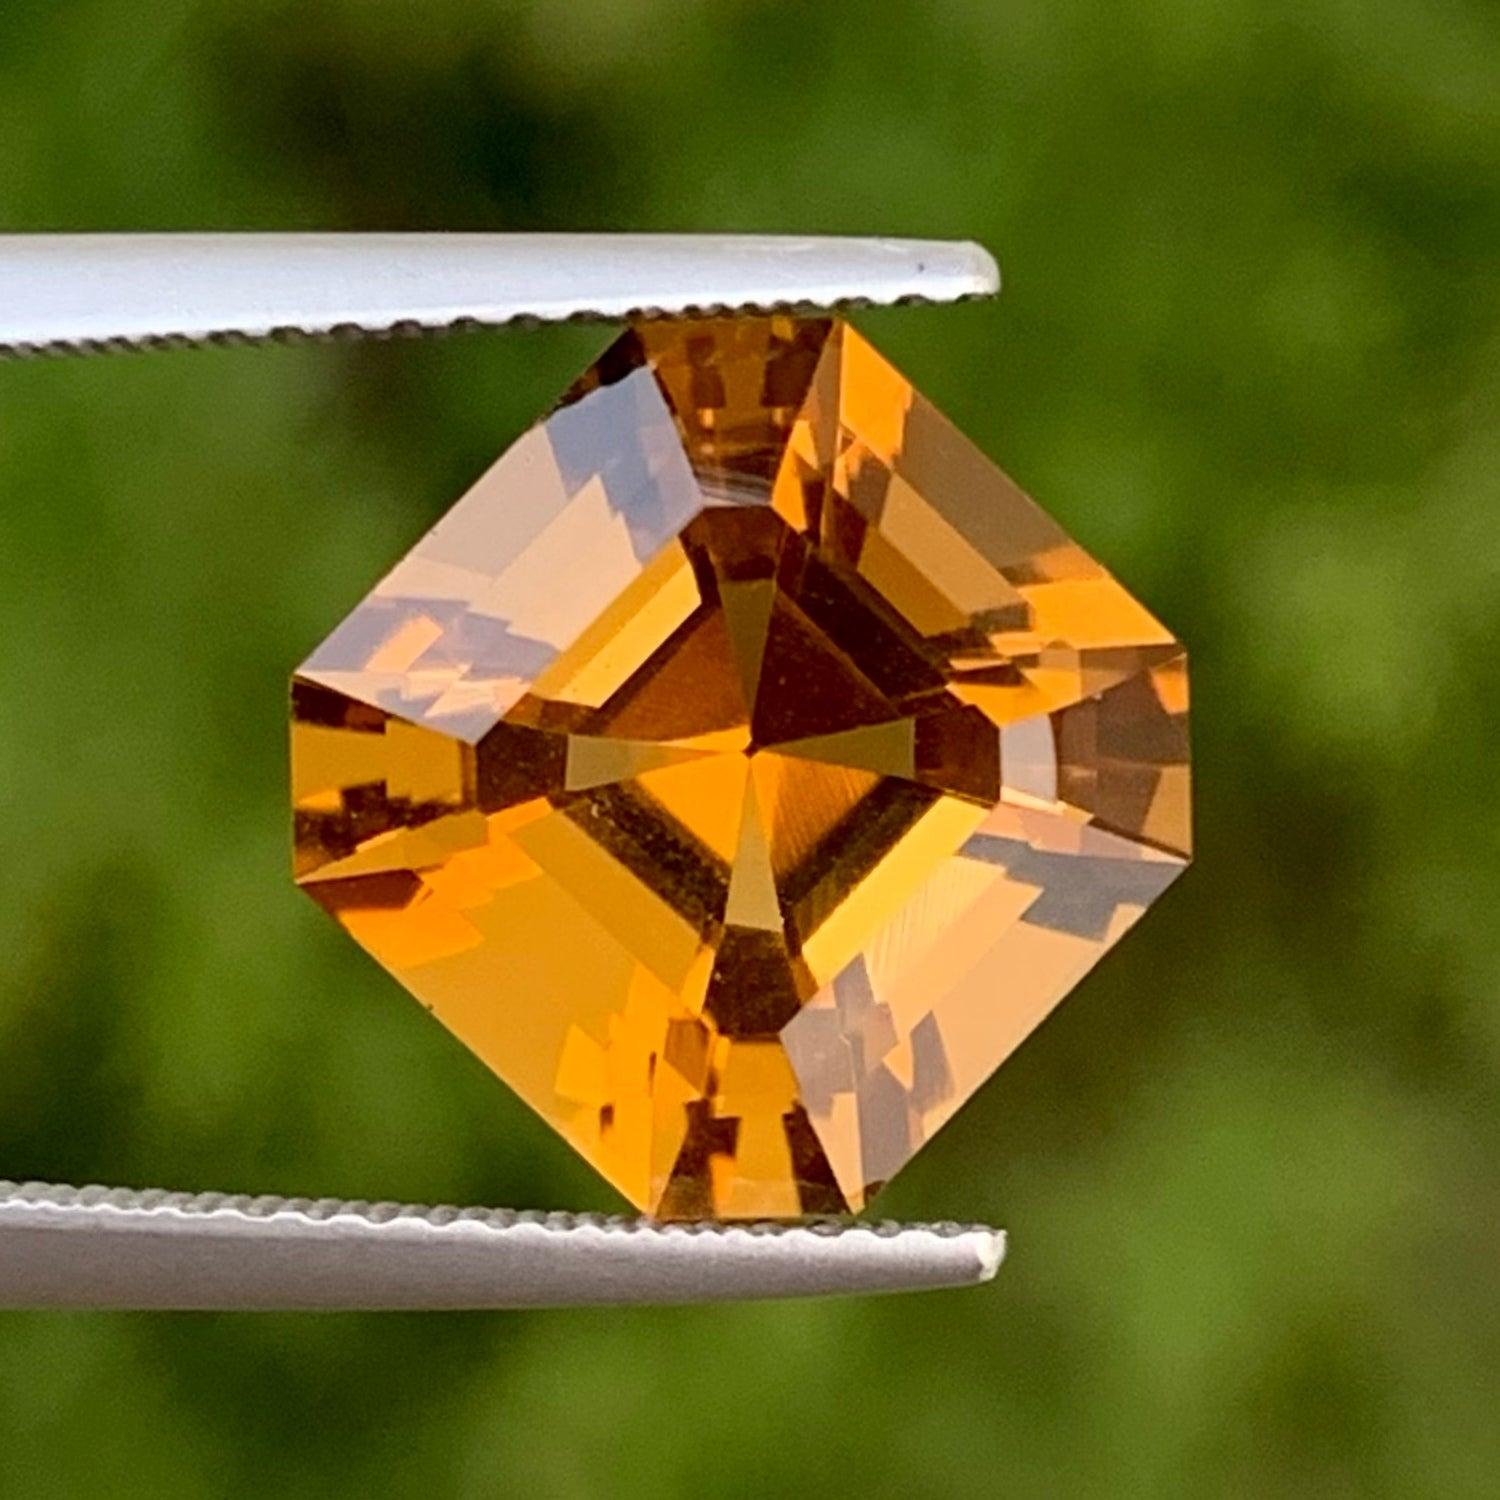 Dazzling Natural Citrine For Ring, Available for sale at whole sale price natural high quality 6.30 Carats Loupe Clean Clarity Unheated Citrine From Brazil.

Product Information:
GEMSTONE TYPE: Dazzling Natural Citrine For Ring
WEIGHT: 6.30